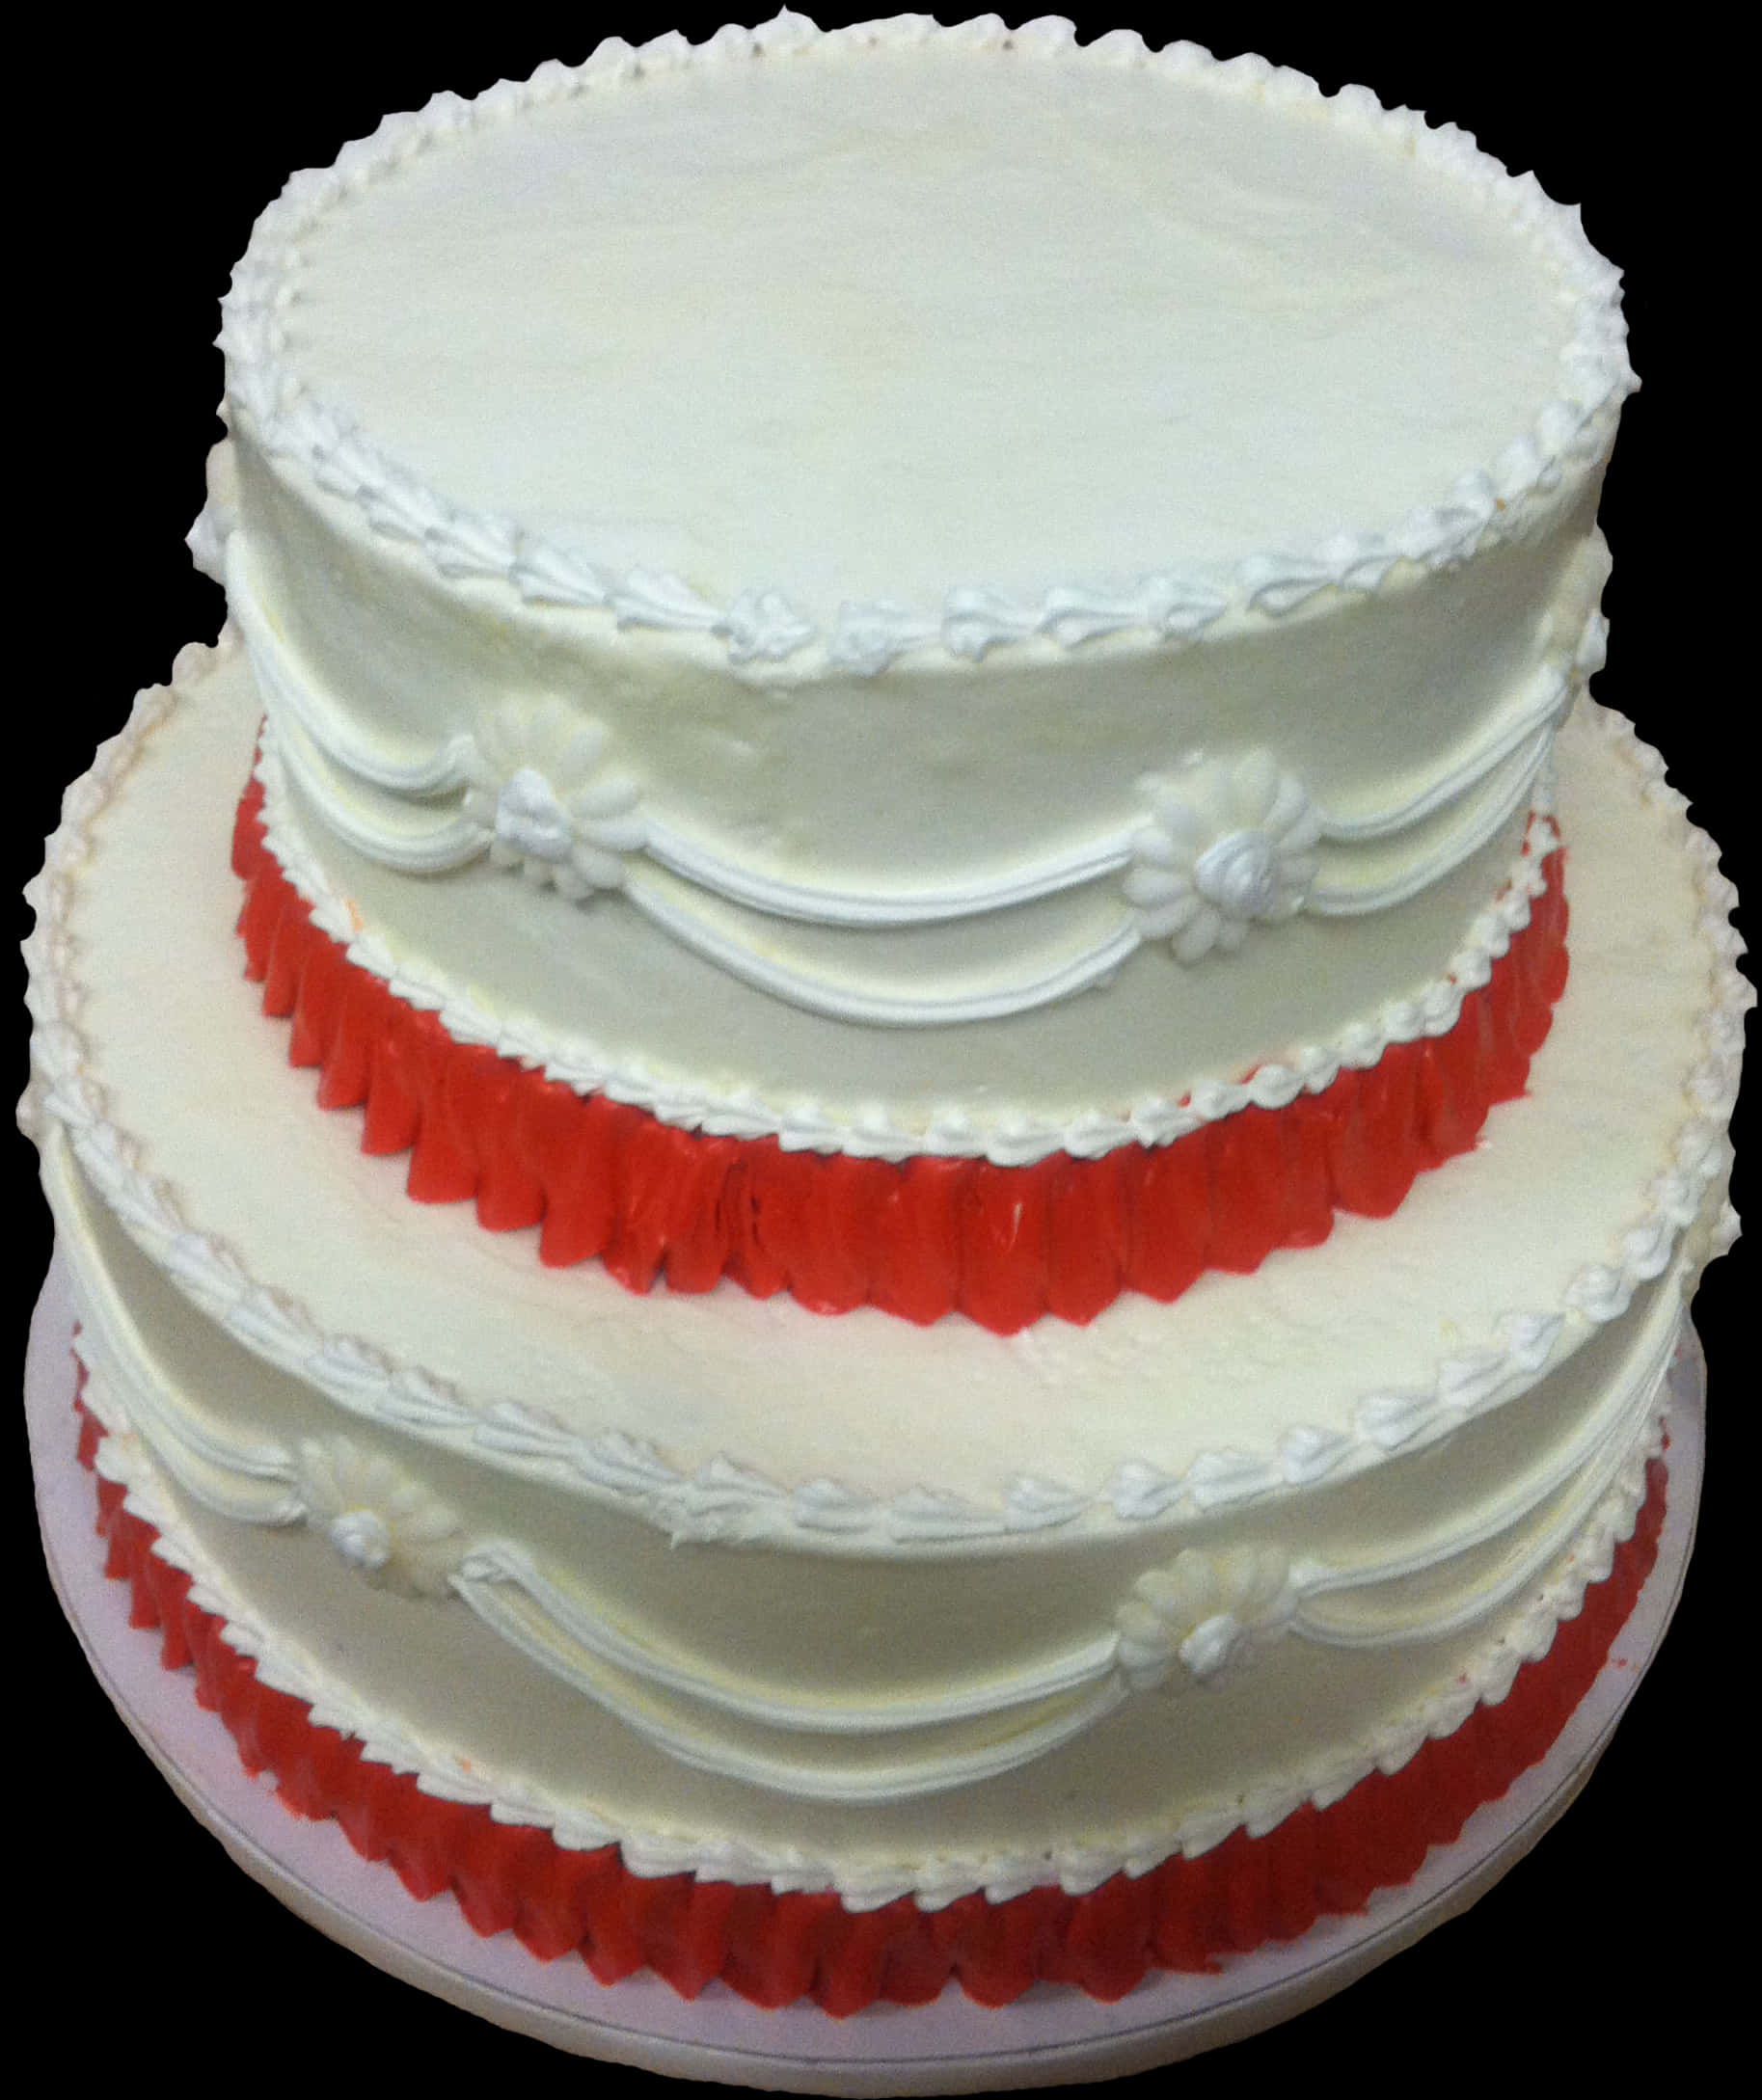 Three Tier Redand White Decorated Cake PNG image